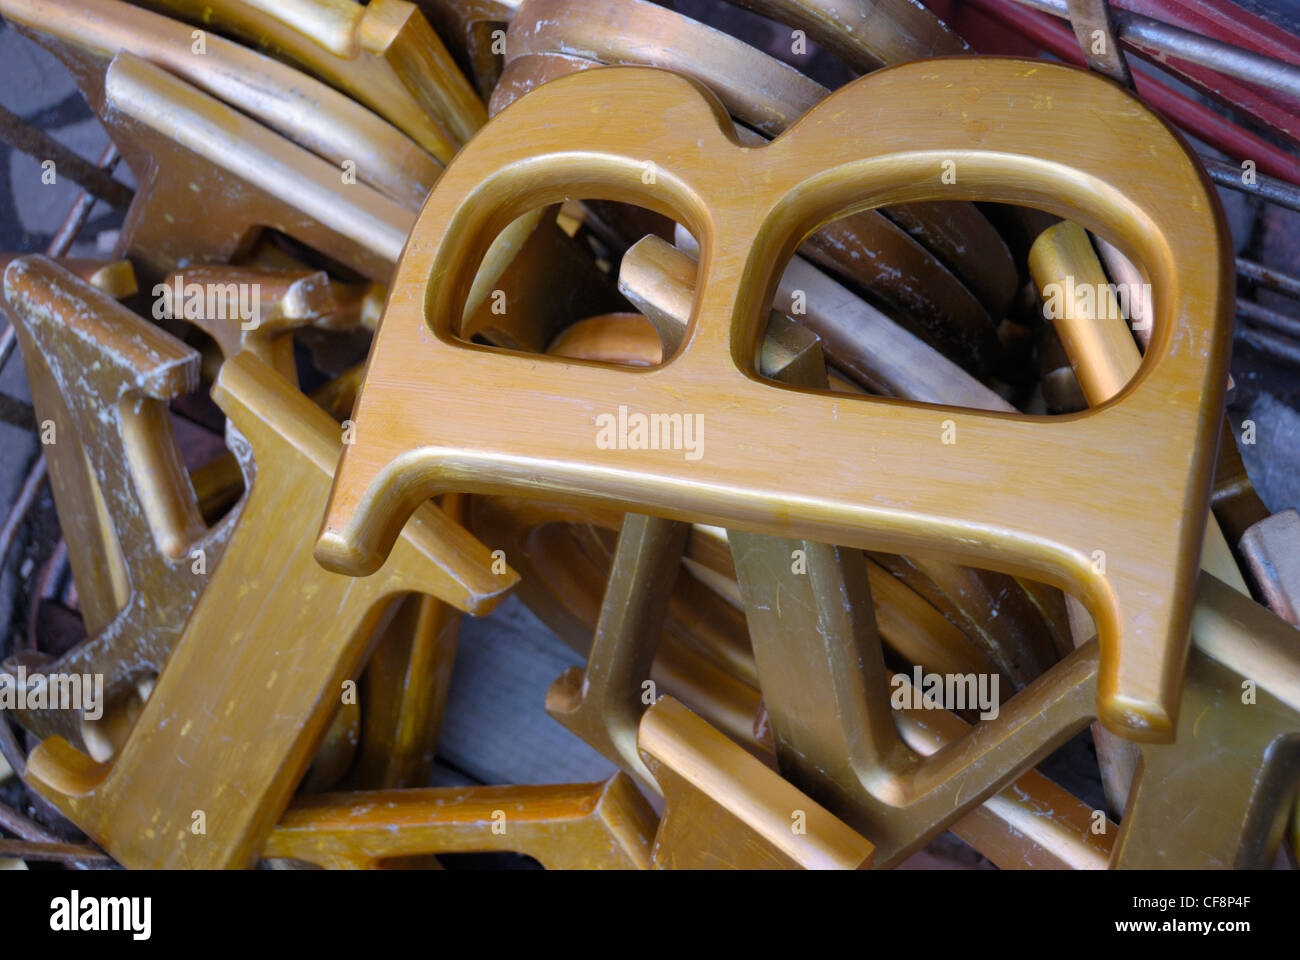 A pile of wooden letters Stock Photo